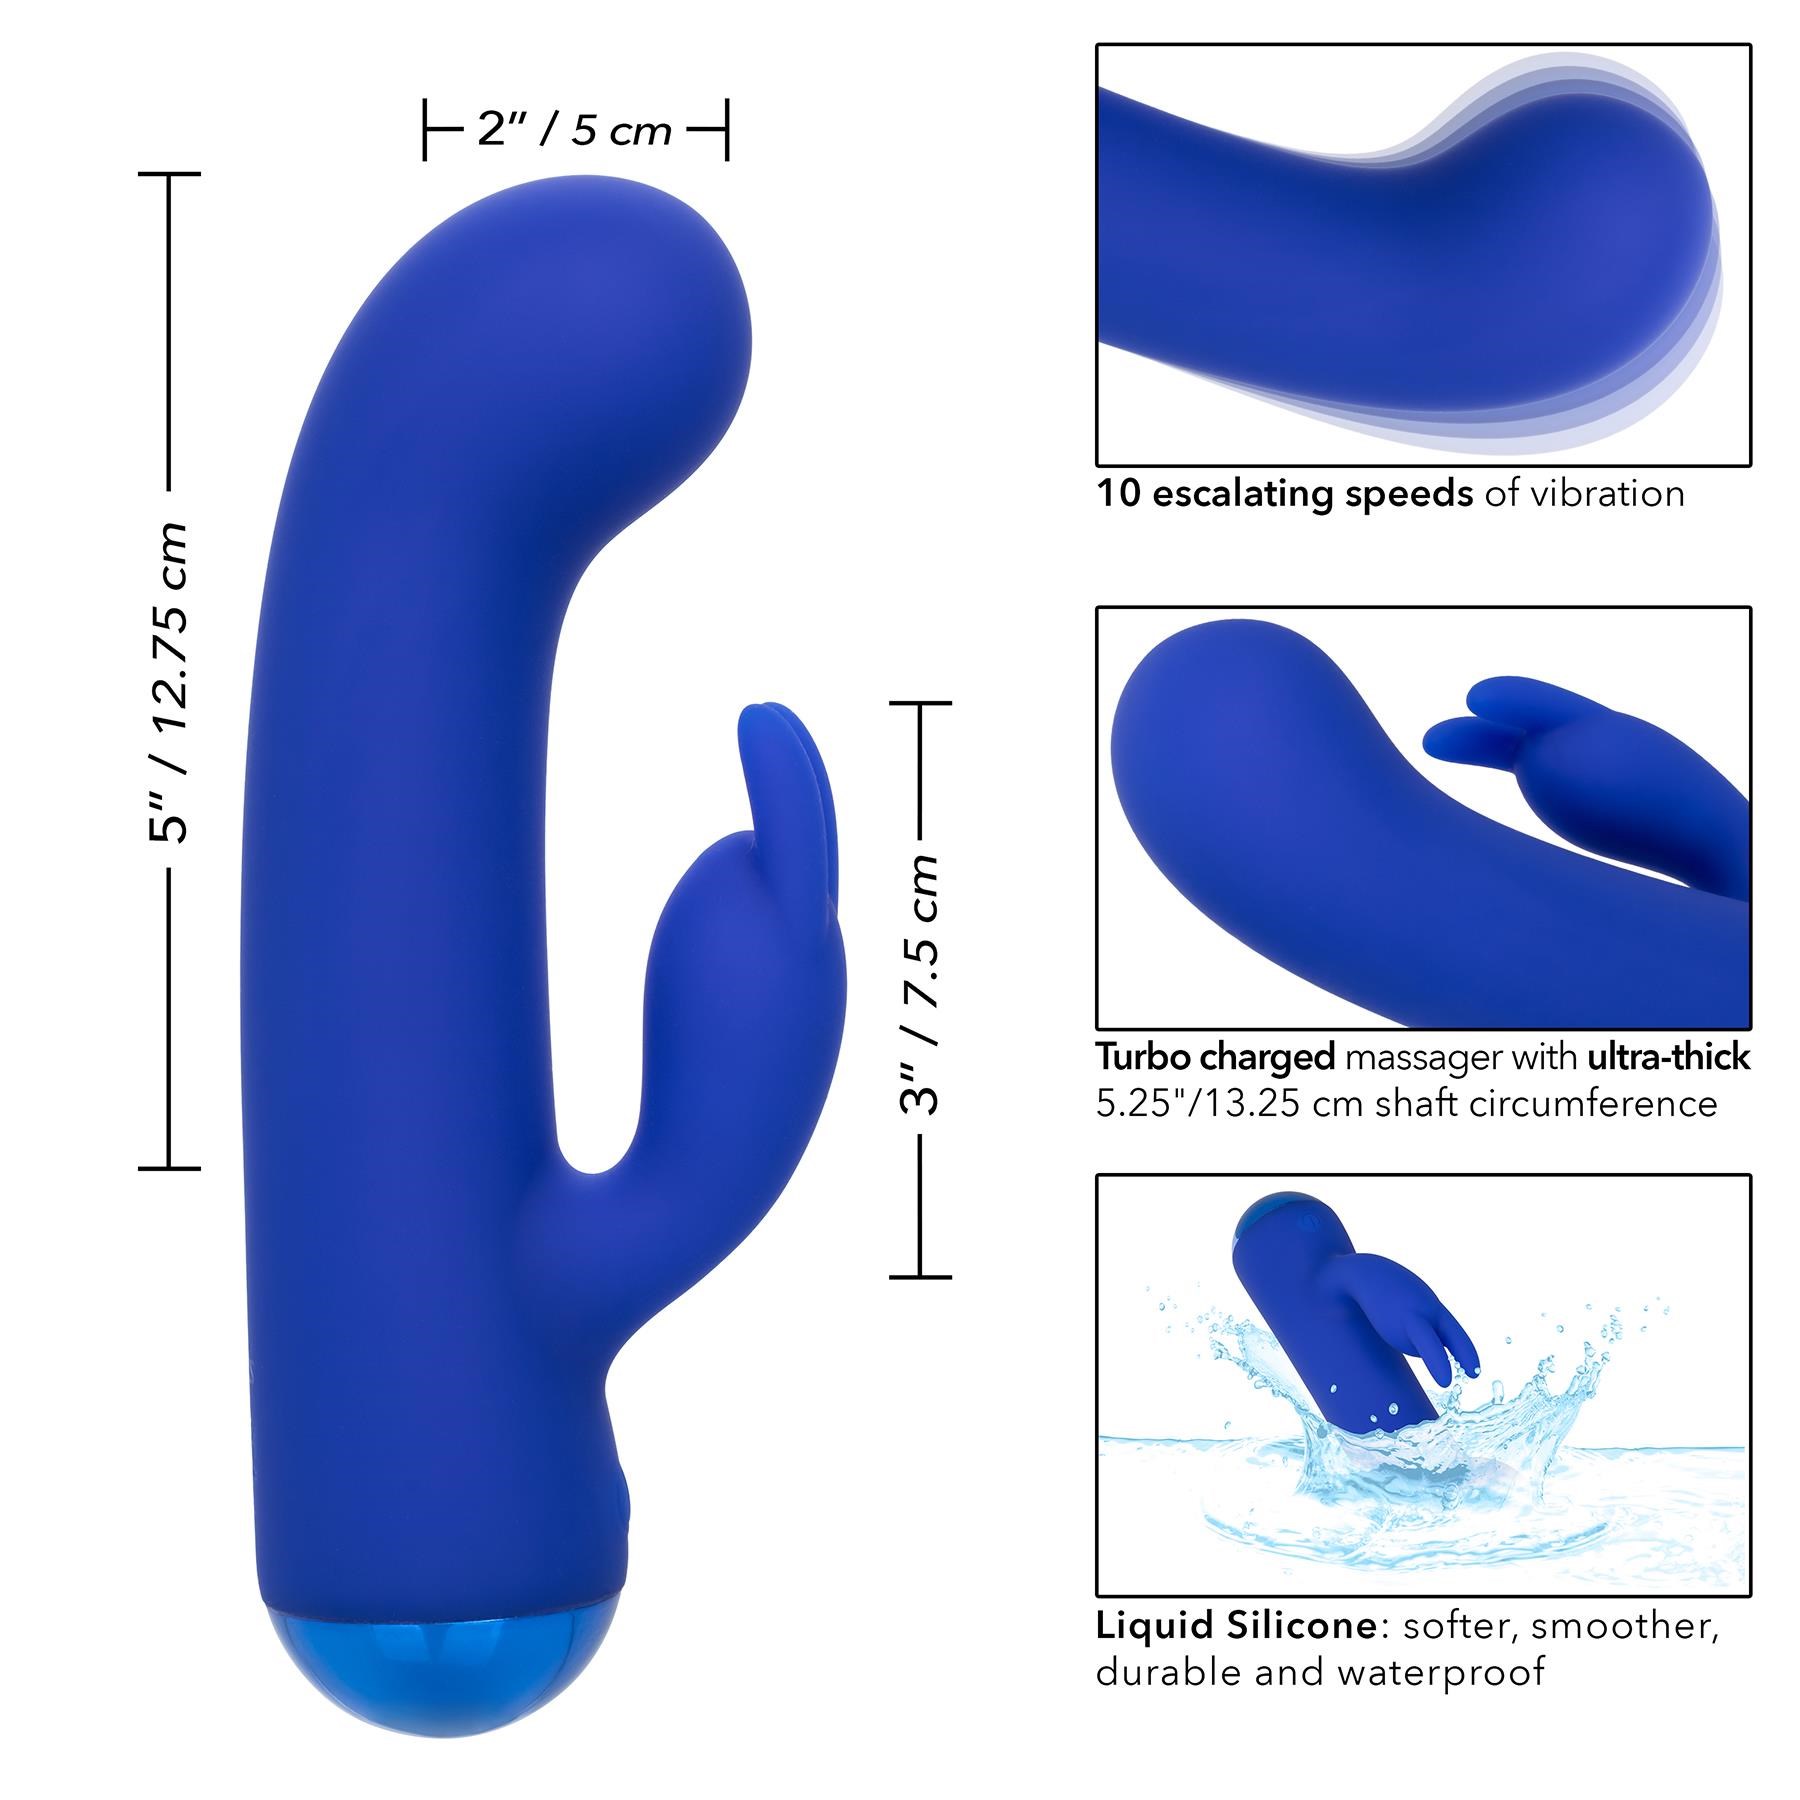 Thicc Chubby Bunny G-Spot Rabbit - Instructions and Dimensions